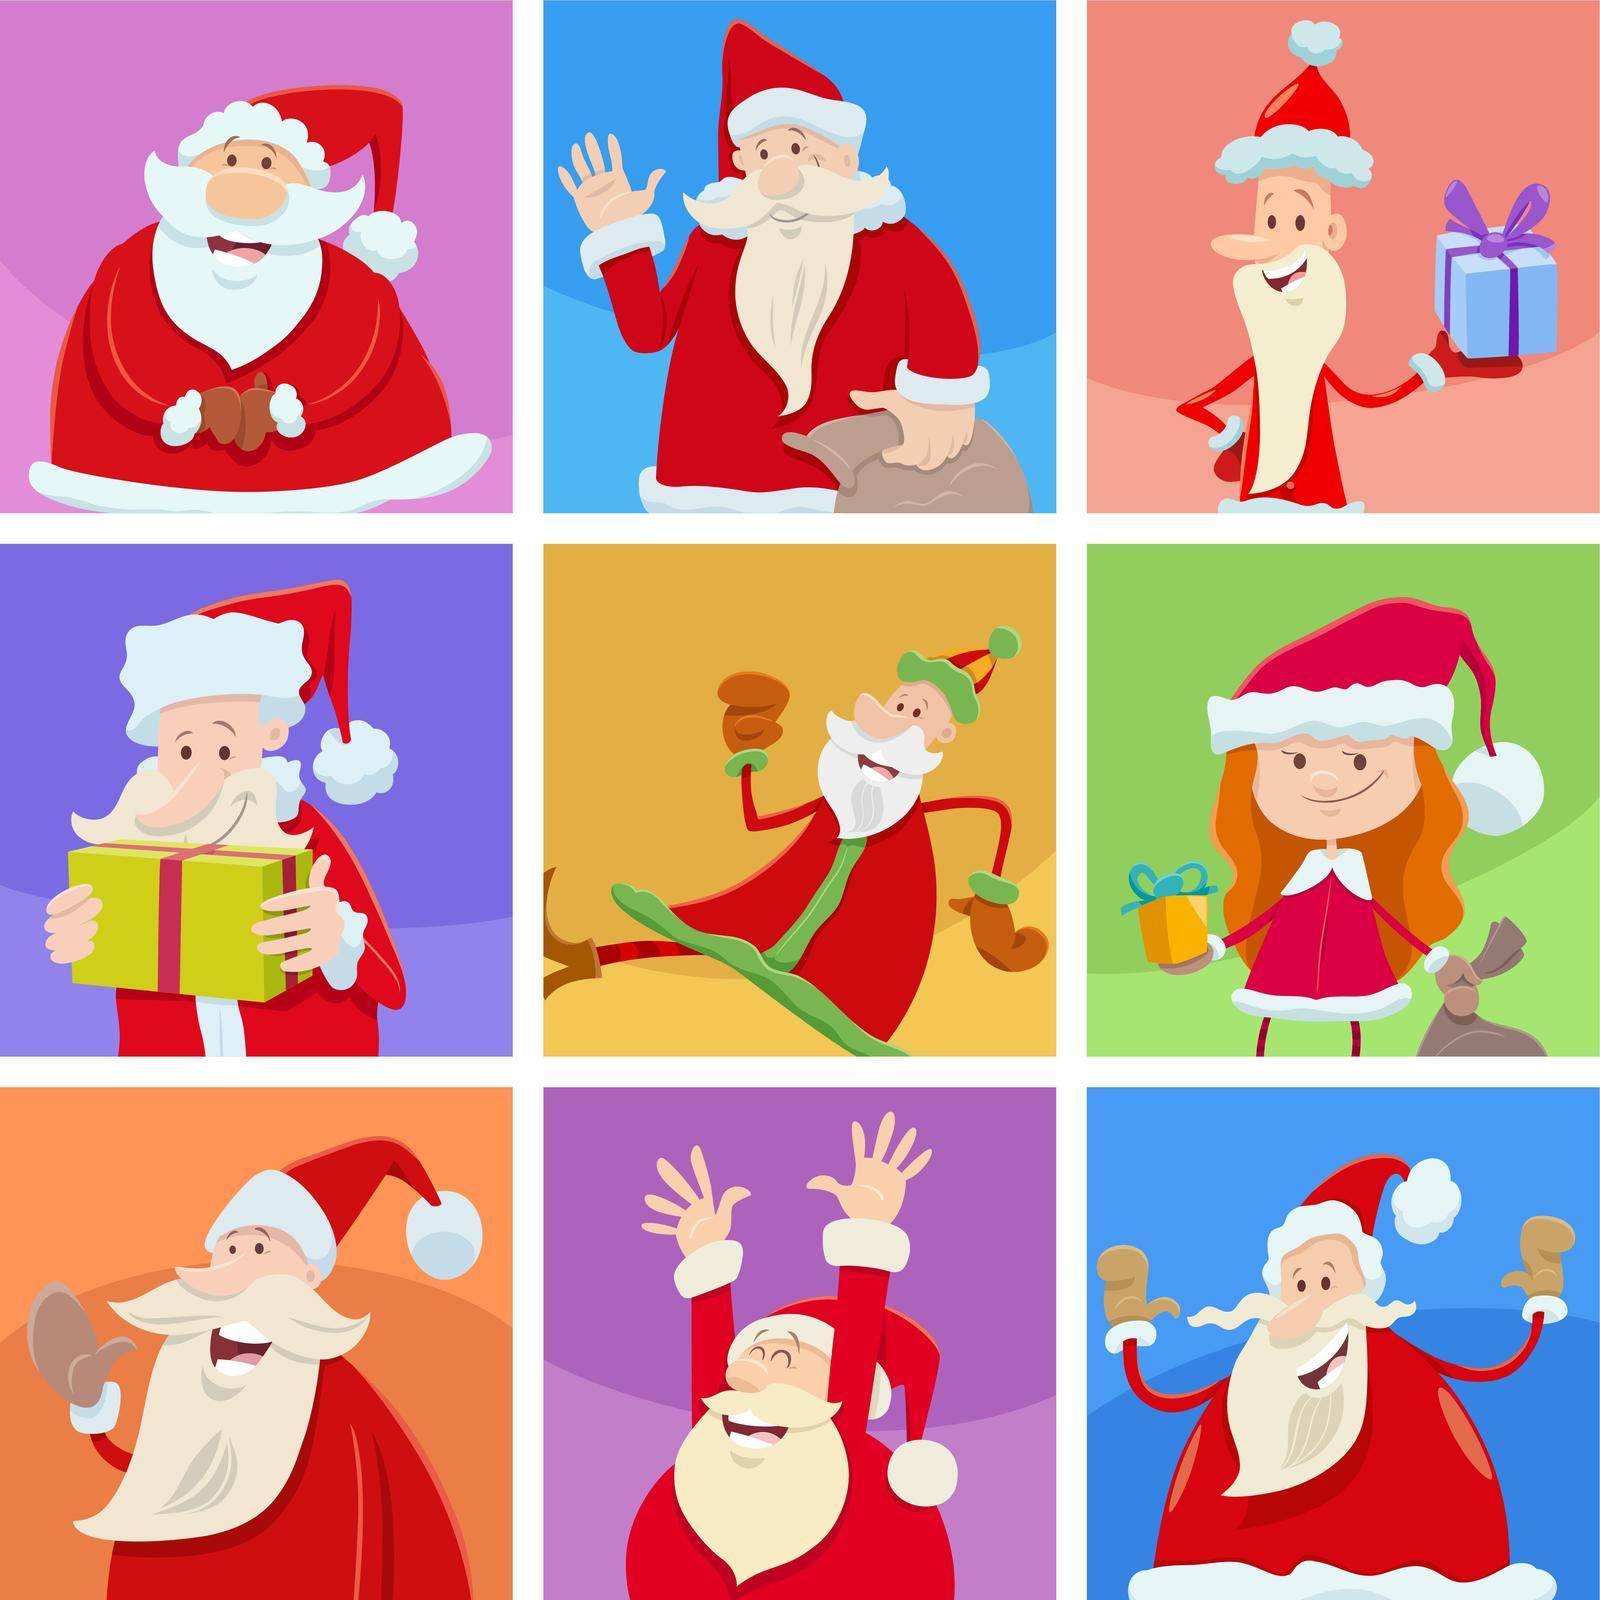 holiday design with happy Christmas characters by izakowski